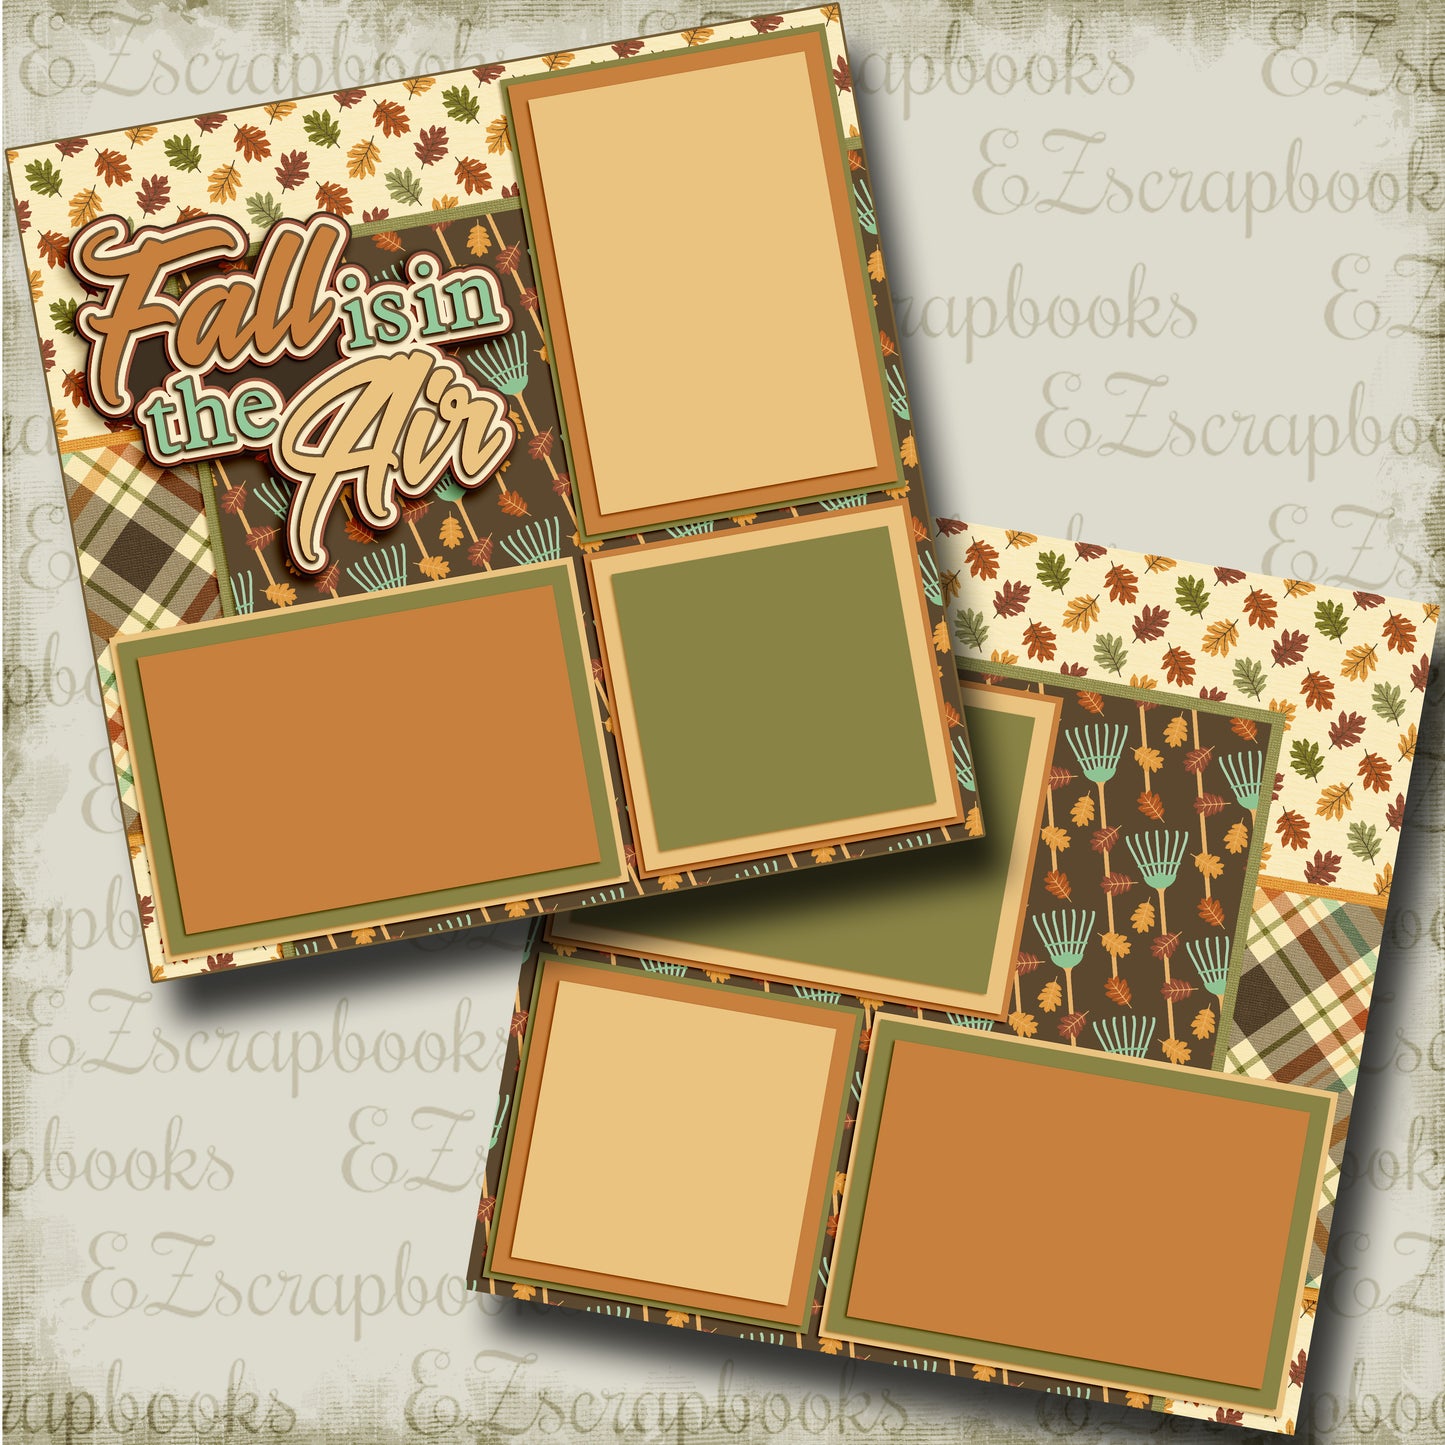 Fall is in the Air - 3560 - EZscrapbooks Scrapbook Layouts Fall - Autumn